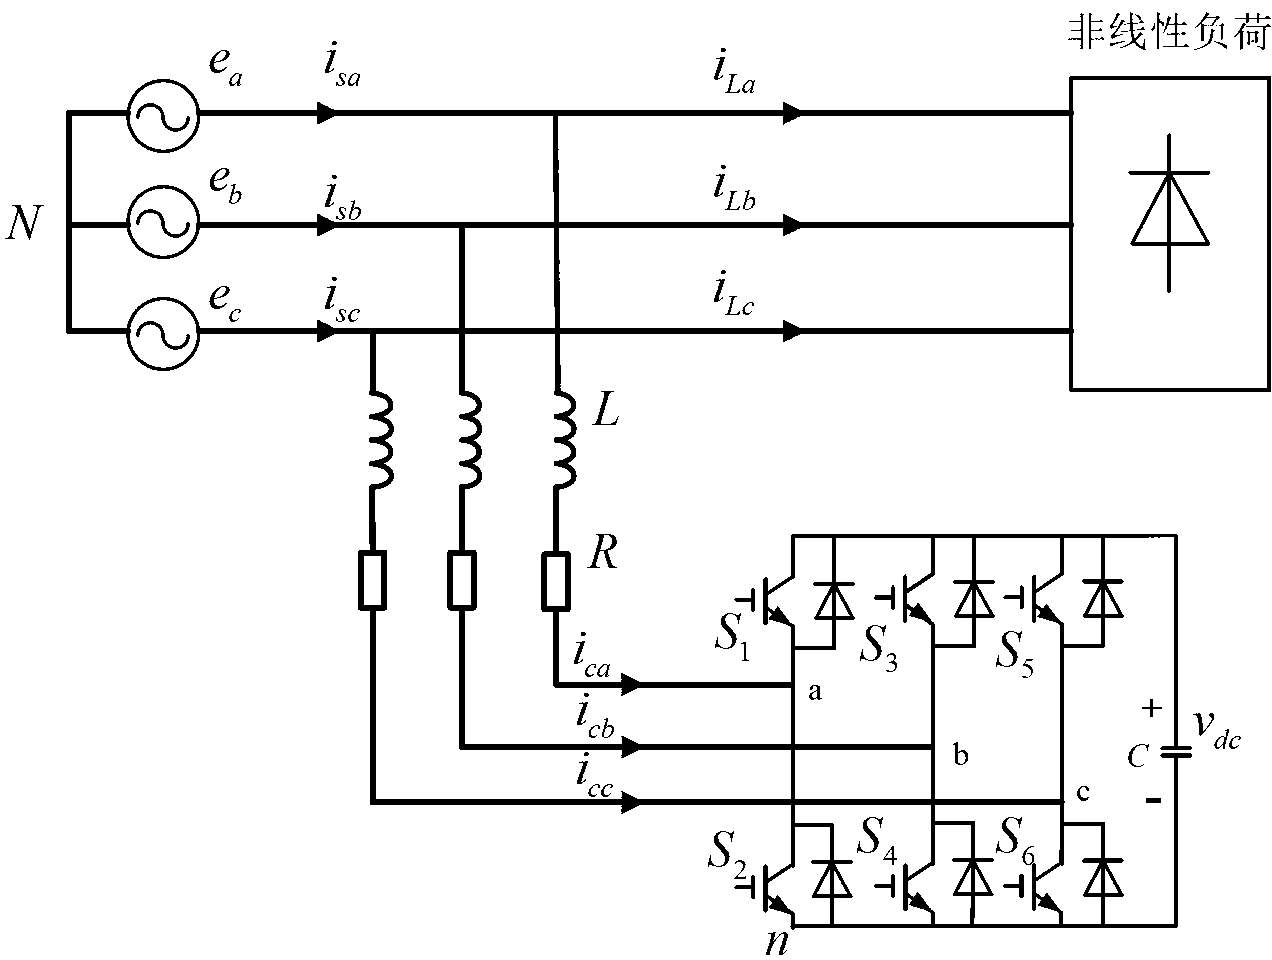 Saturated switching control method for three-phase parallel active power filter